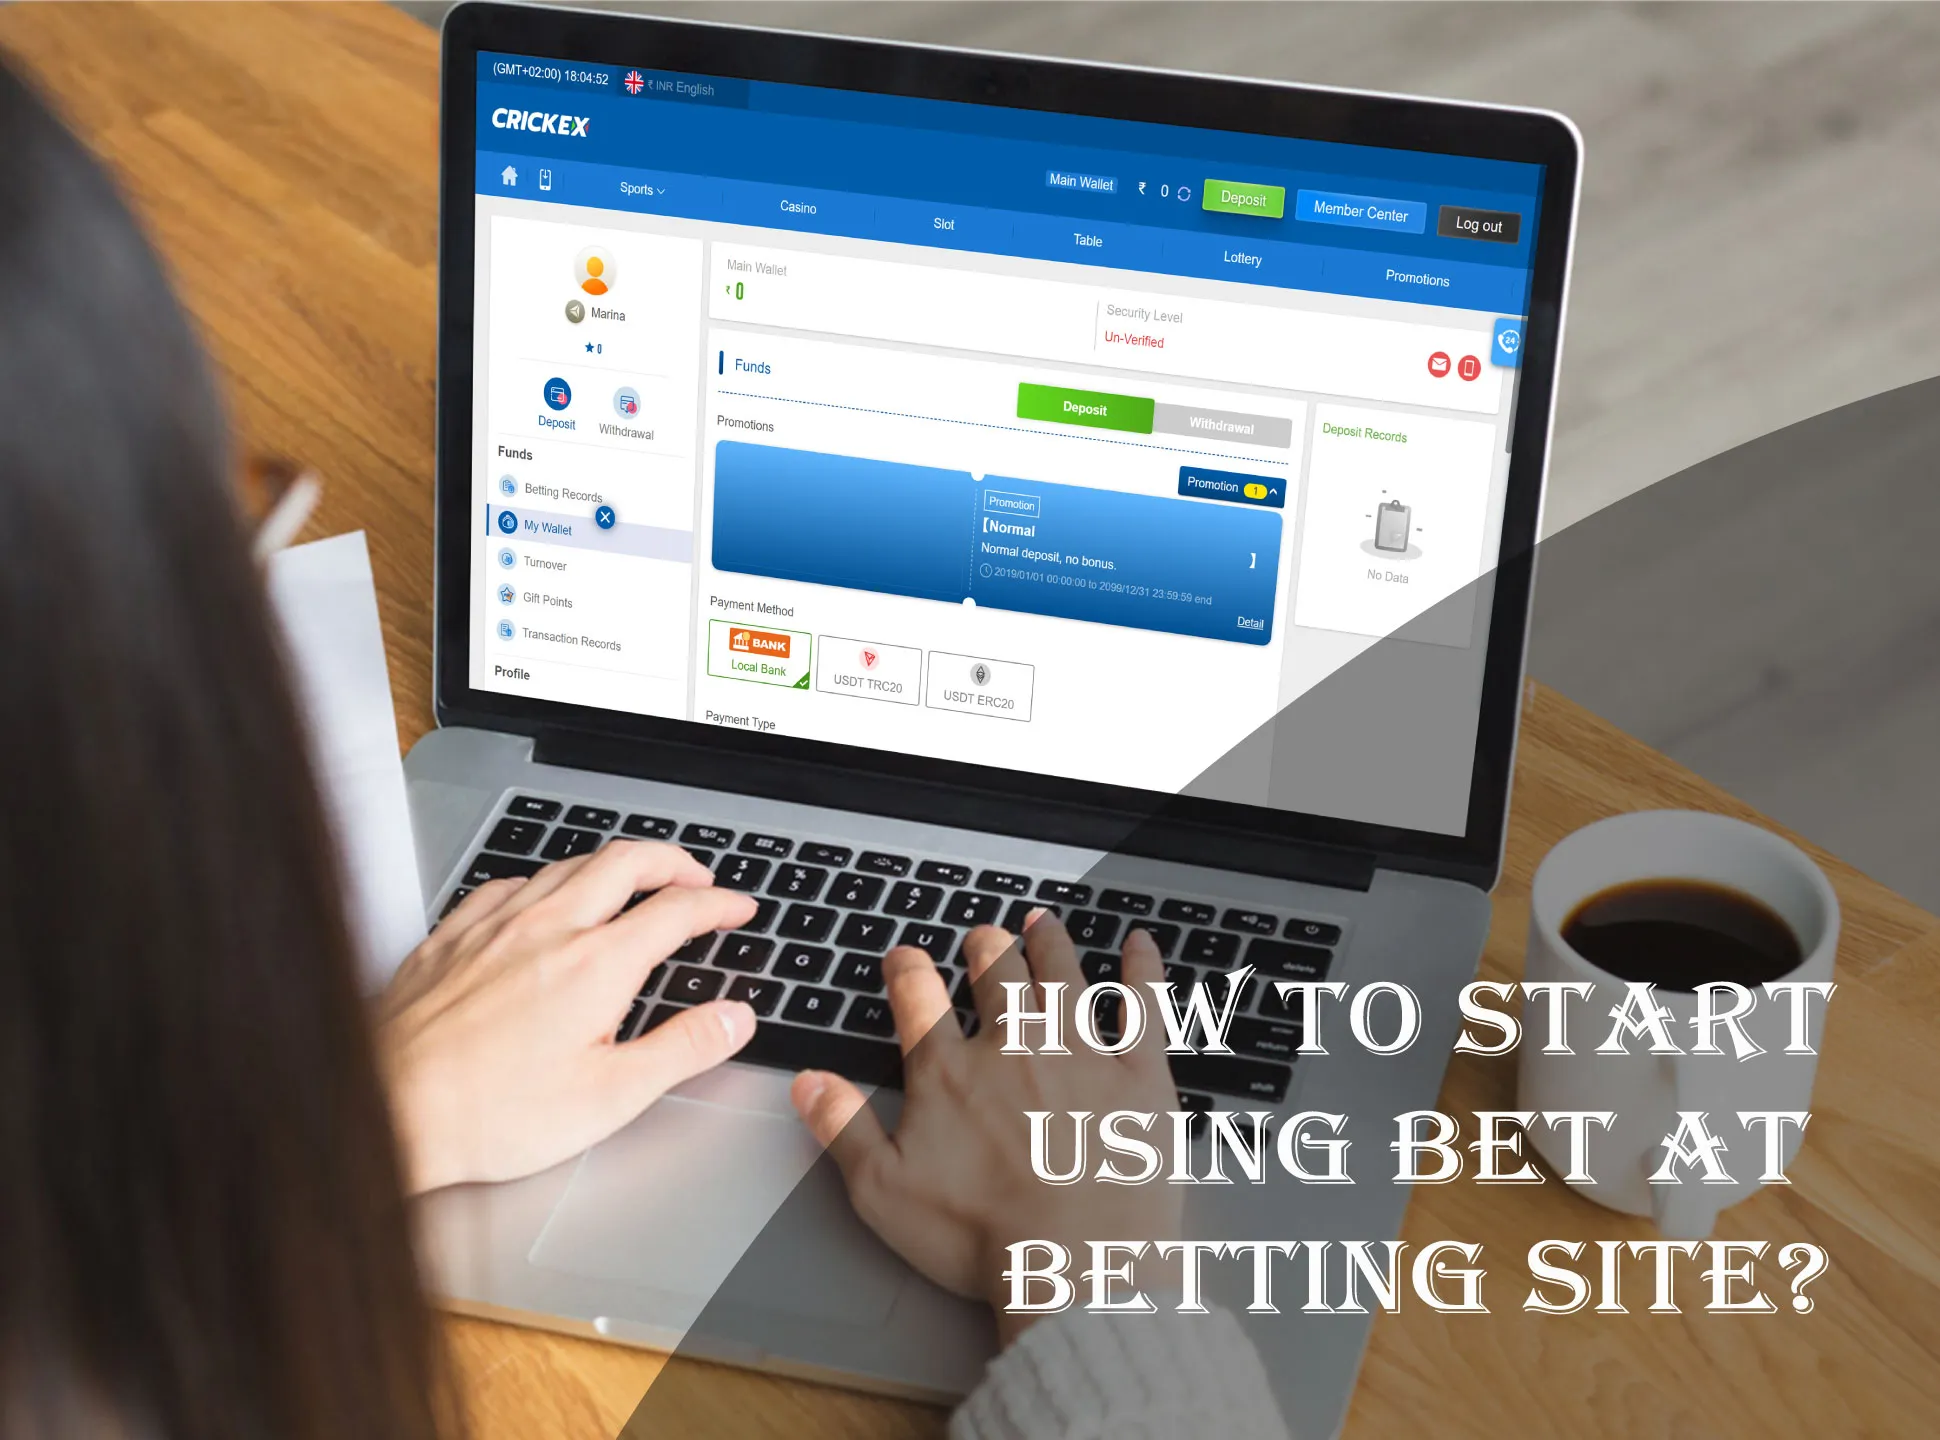 Choose the match you want to bet on, specify the amount of money and place a bet.